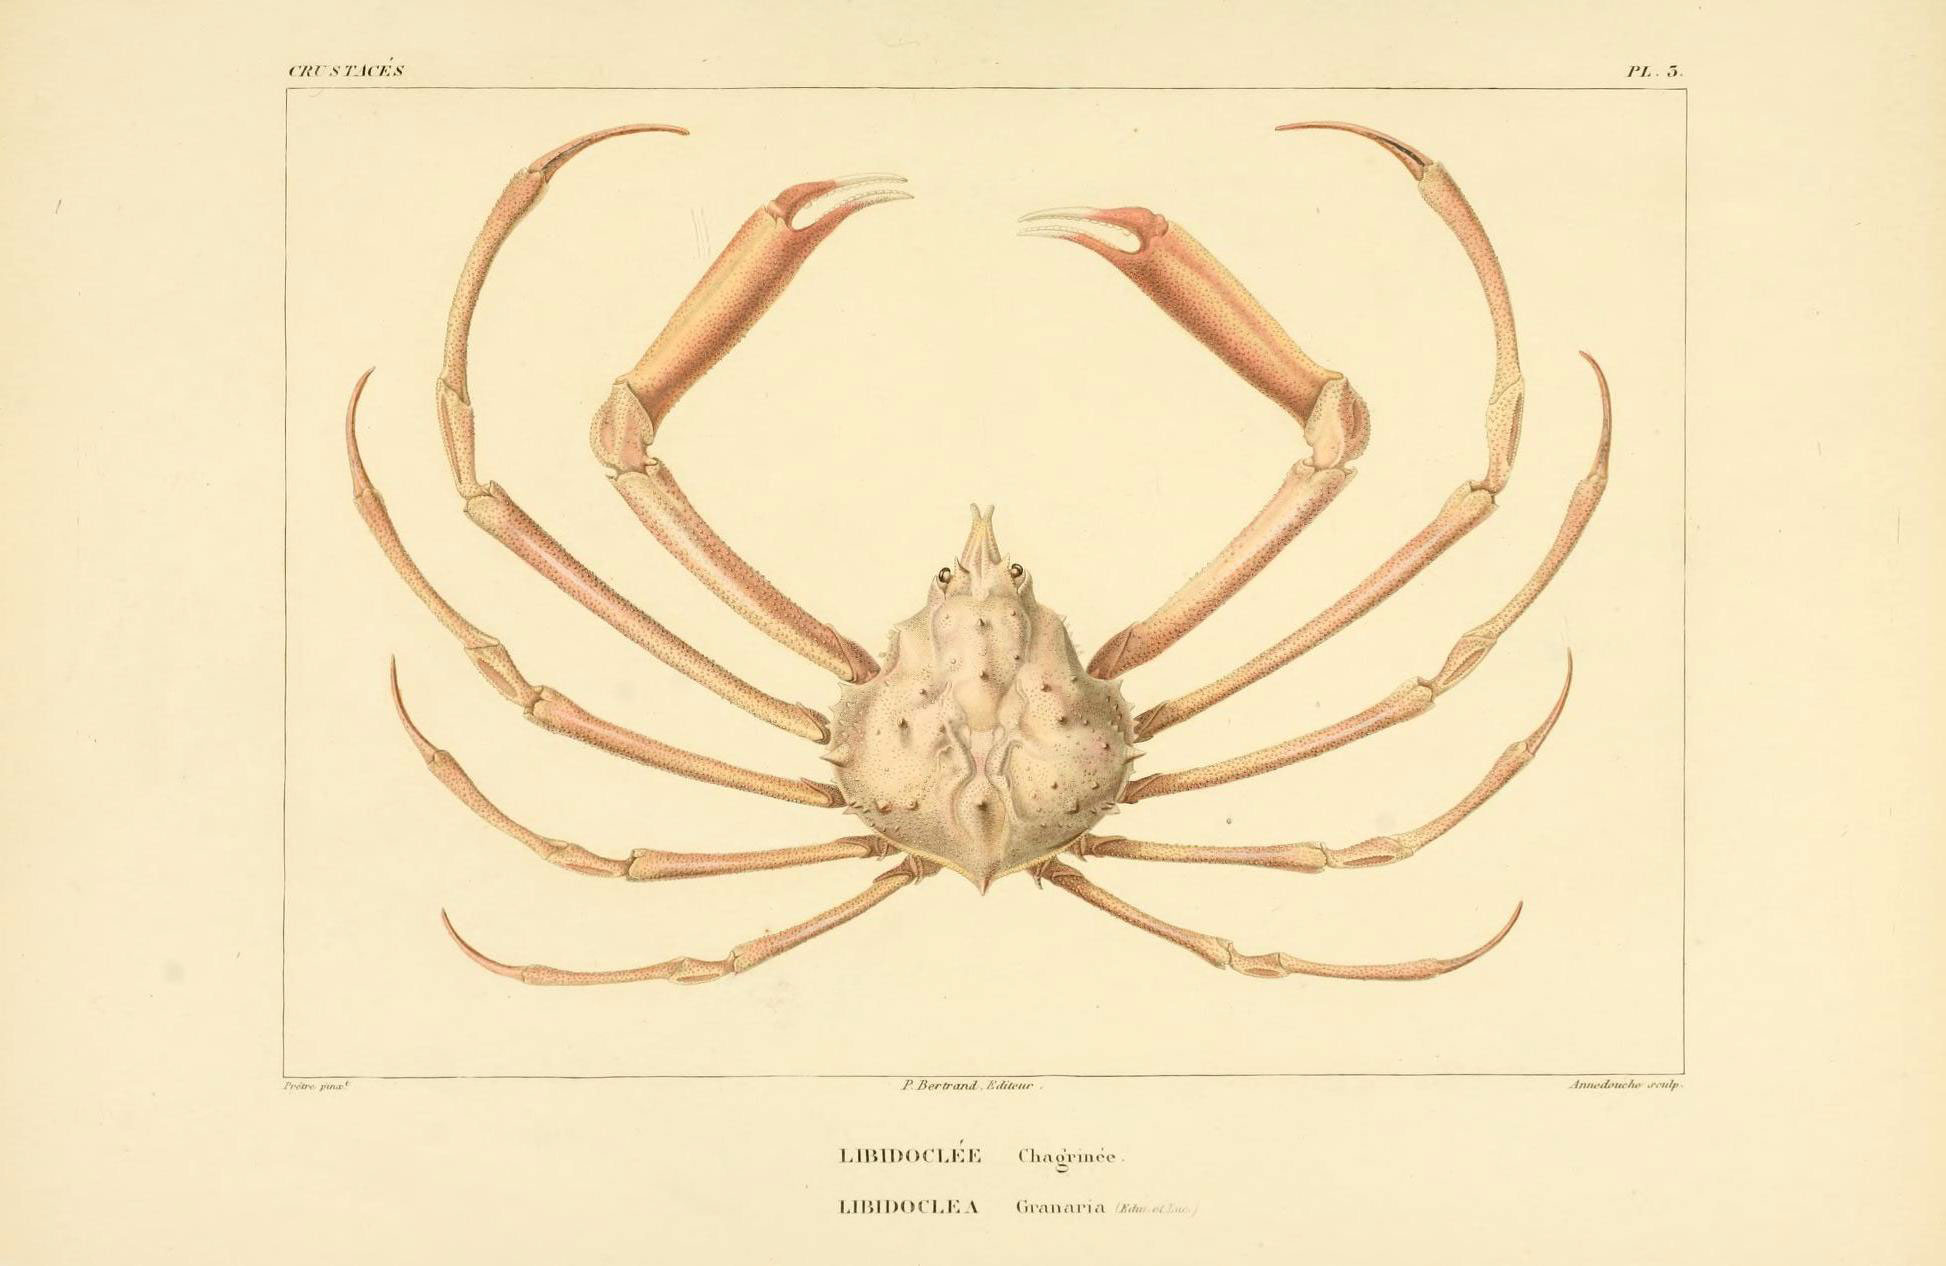 an antique illustration of a crab showing the back